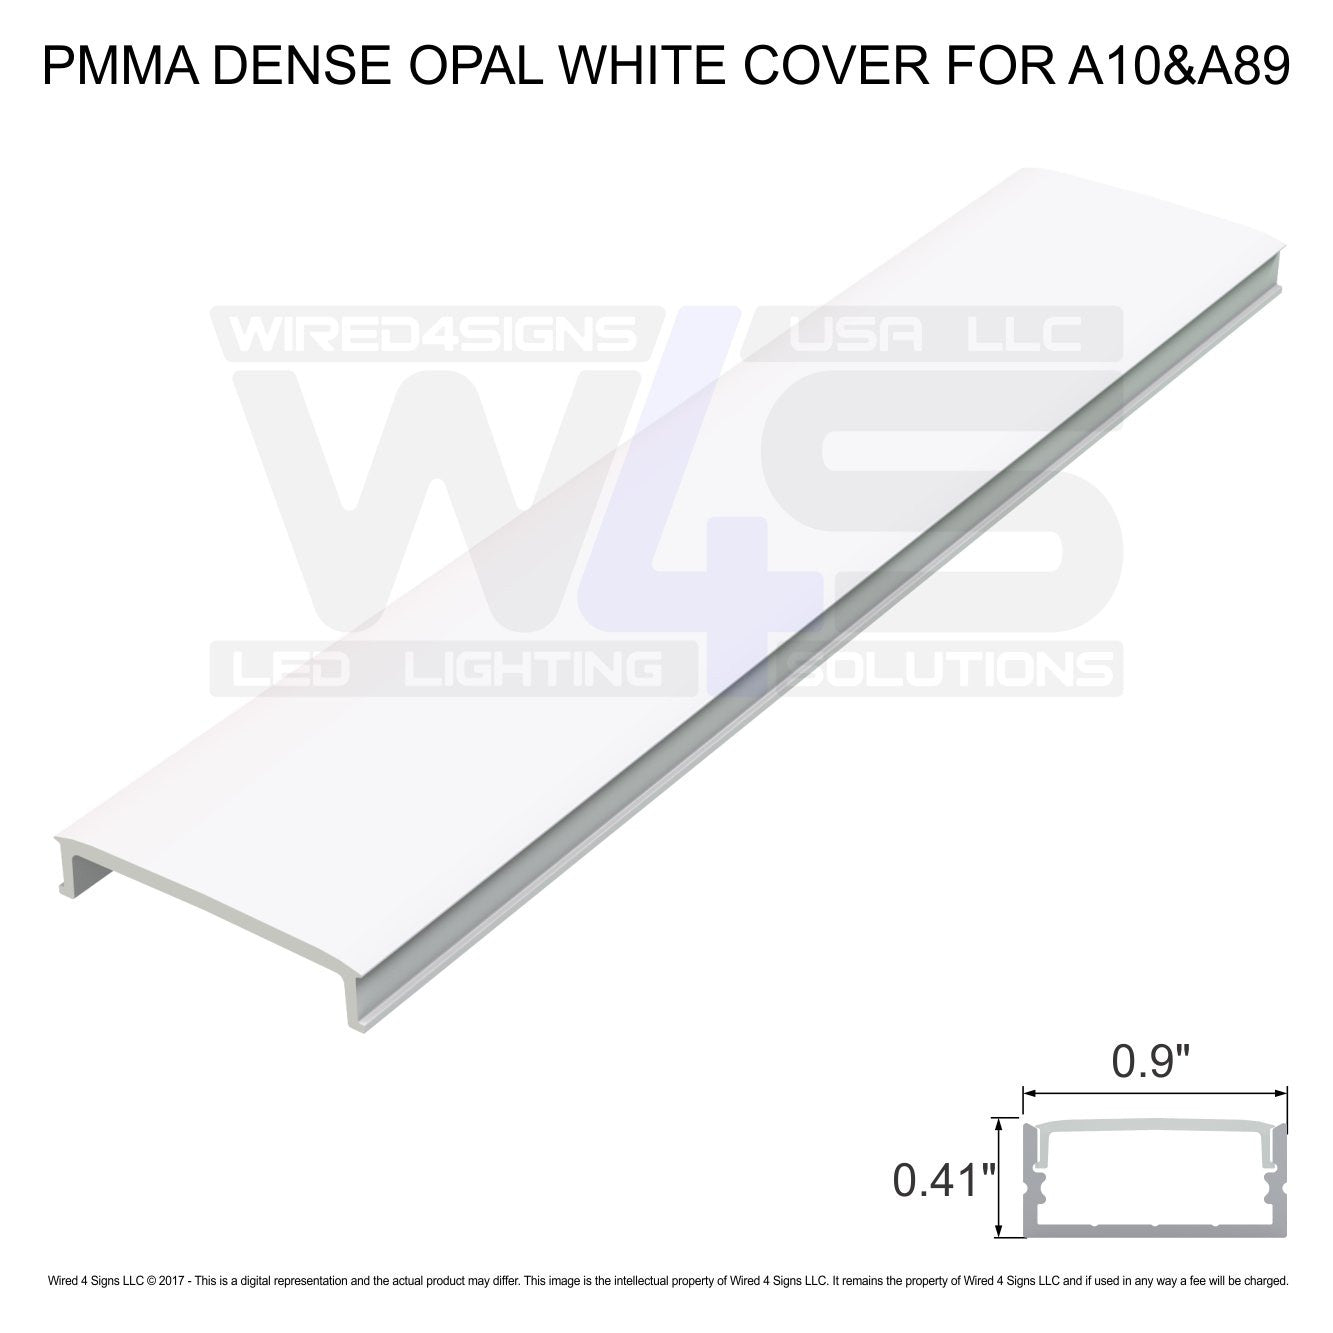 PMMA Dense Opal White cover for A10 & A89 - Dif4 (2m/6.56ft length)